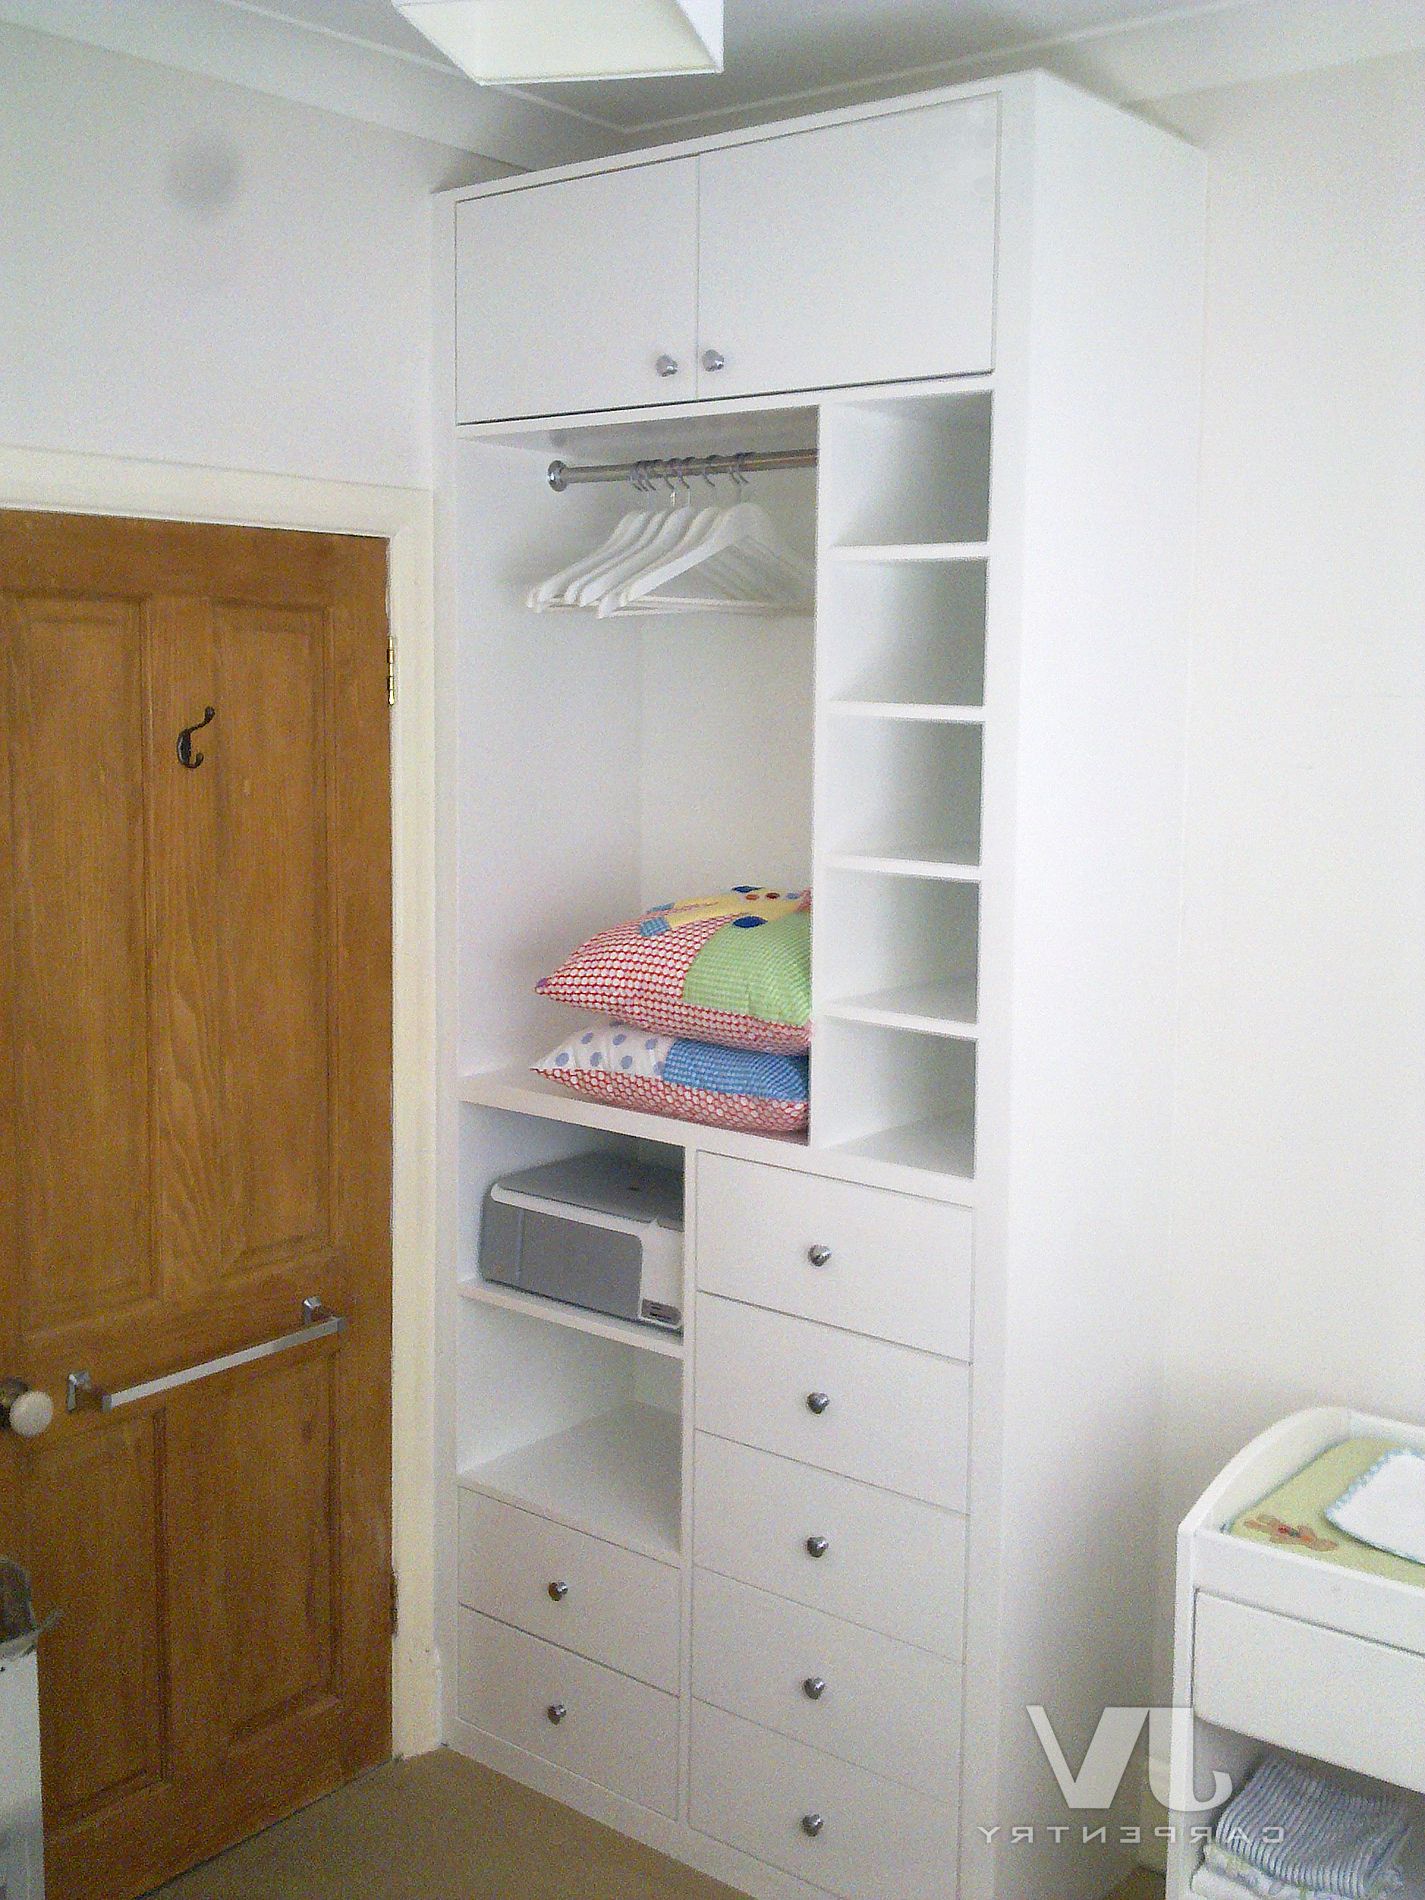 14 Fitted Wardrobe Ideas For A Small Bedroom | Jv Carpentry Pertaining To Short Wardrobes (View 10 of 20)